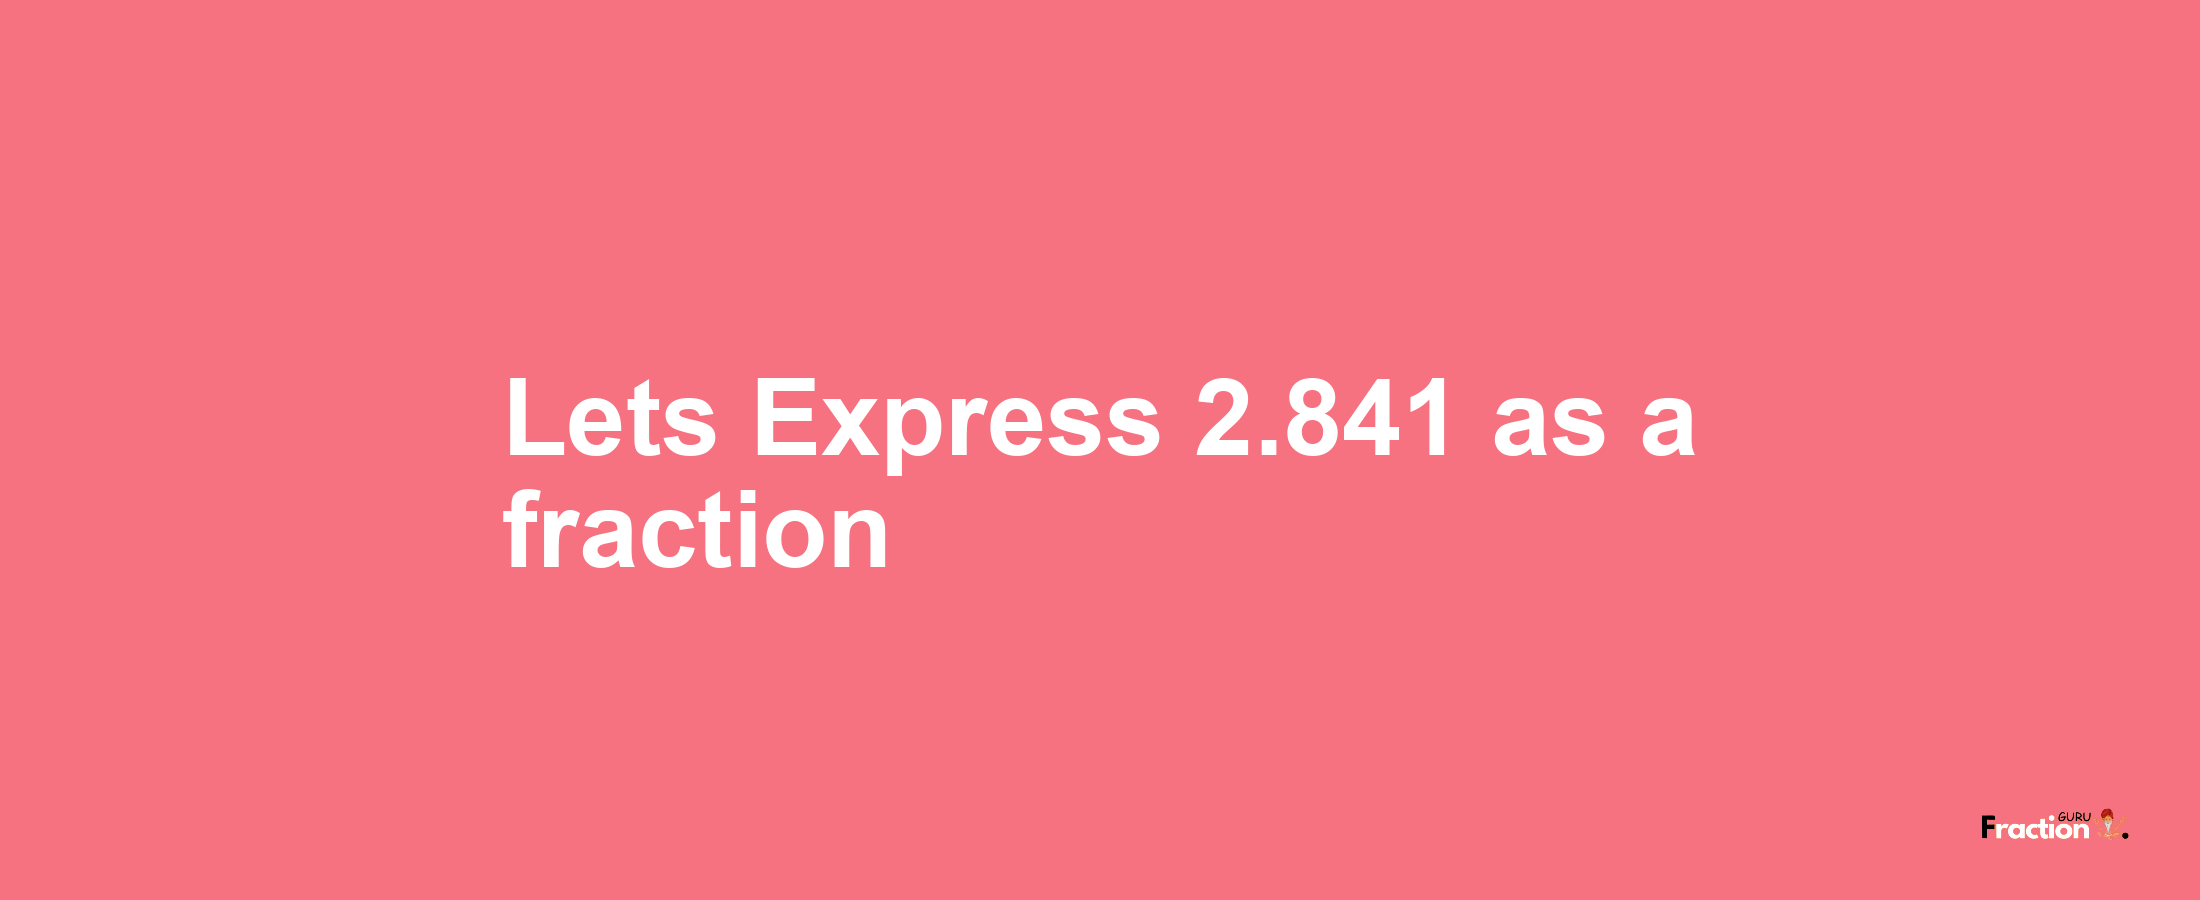 Lets Express 2.841 as afraction